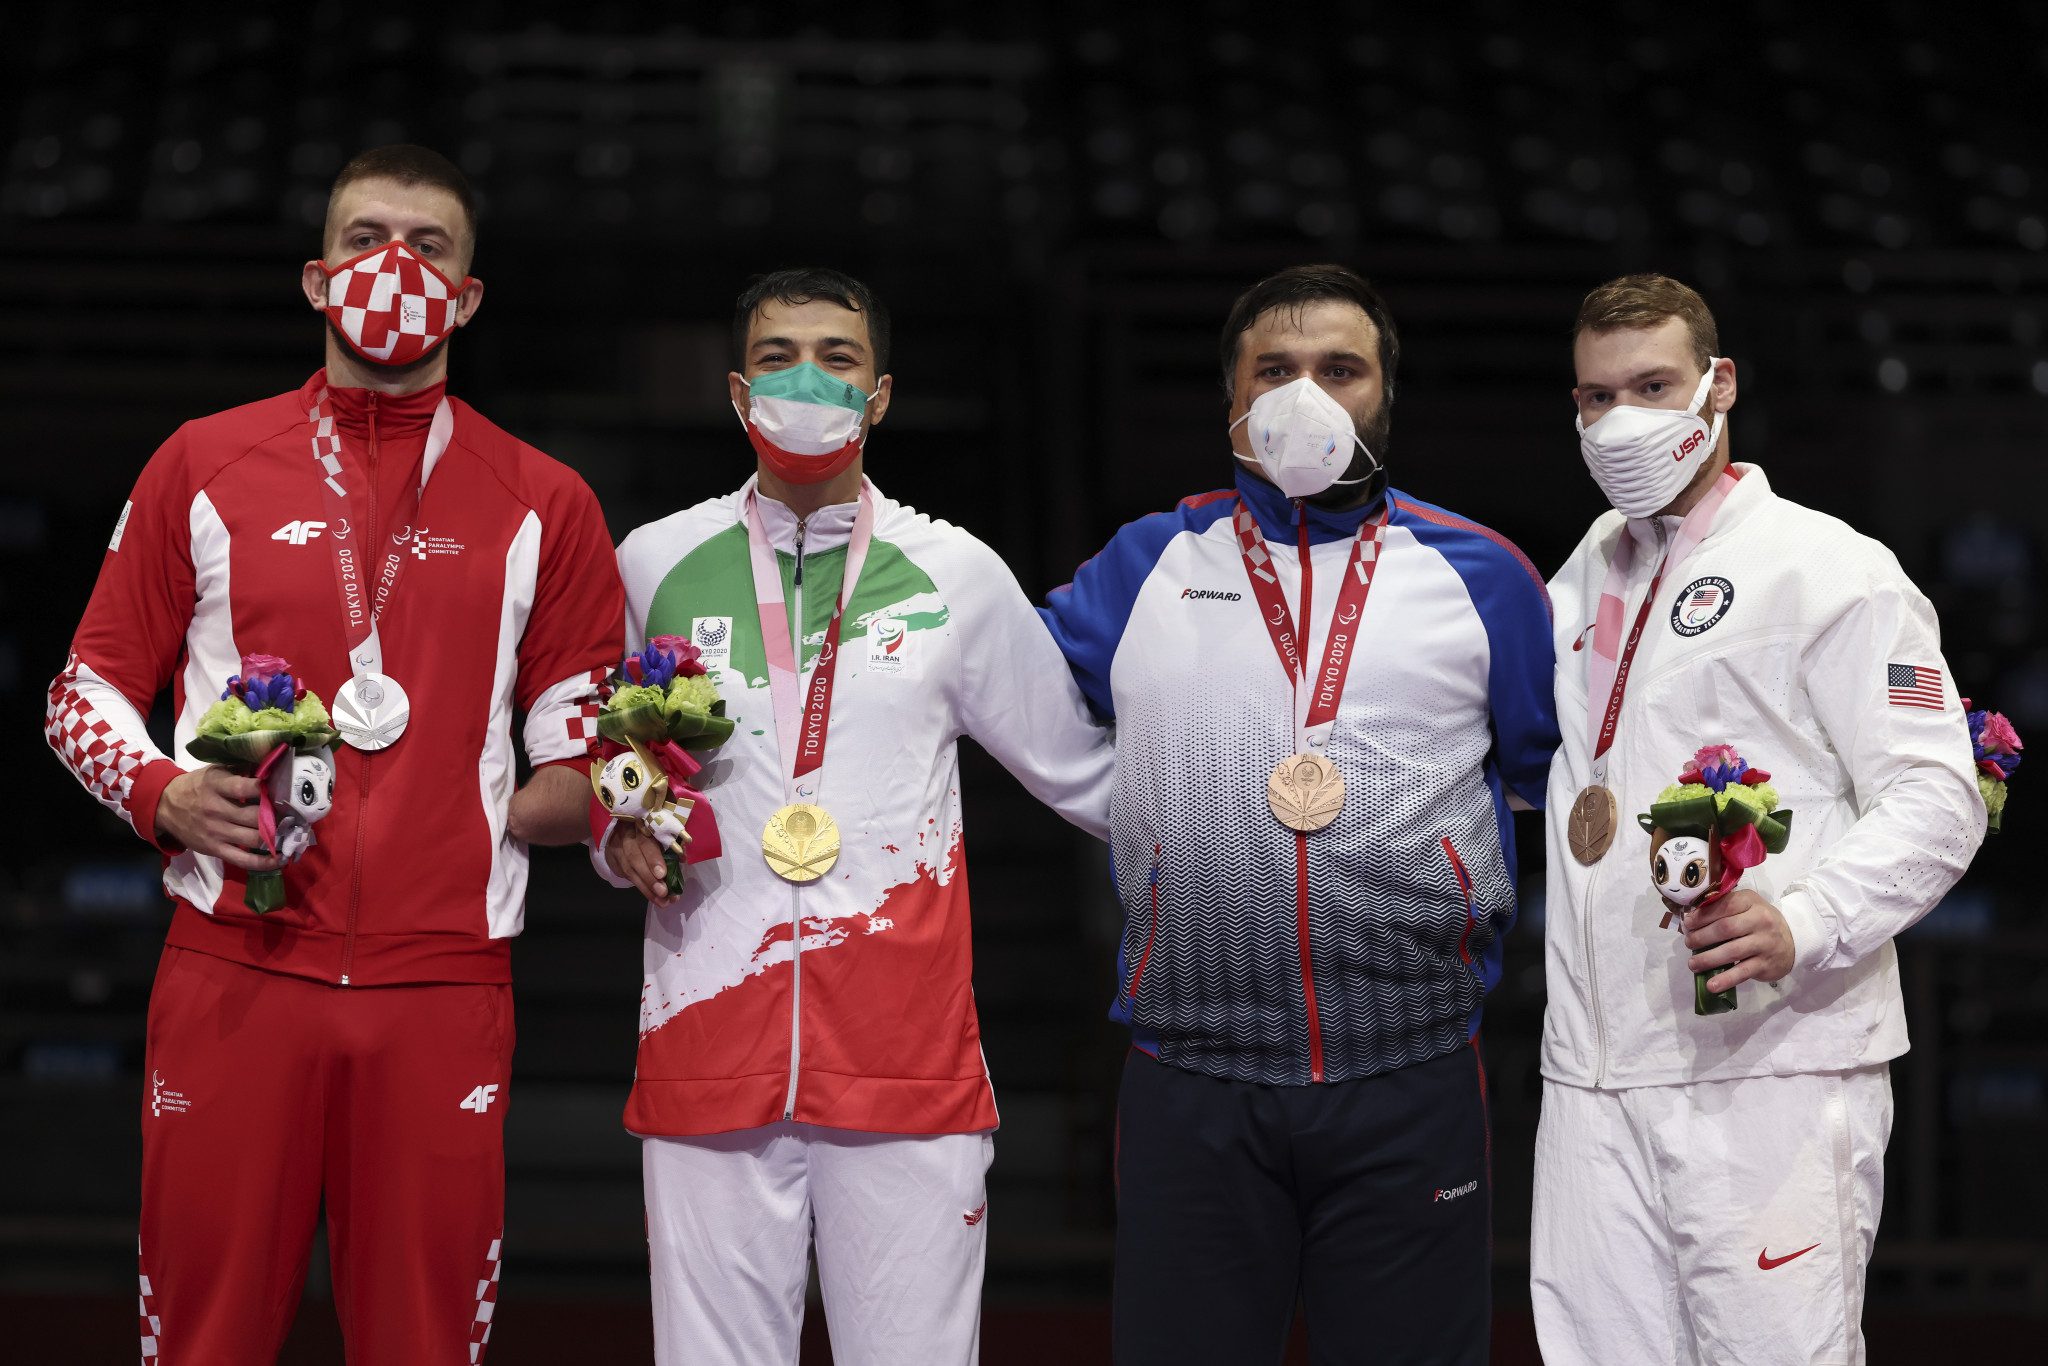 Evan Meddell, first on the right, won bronze at Tokyo 2020, to give Team USA their first Para taekwondo medal ©Getty Images